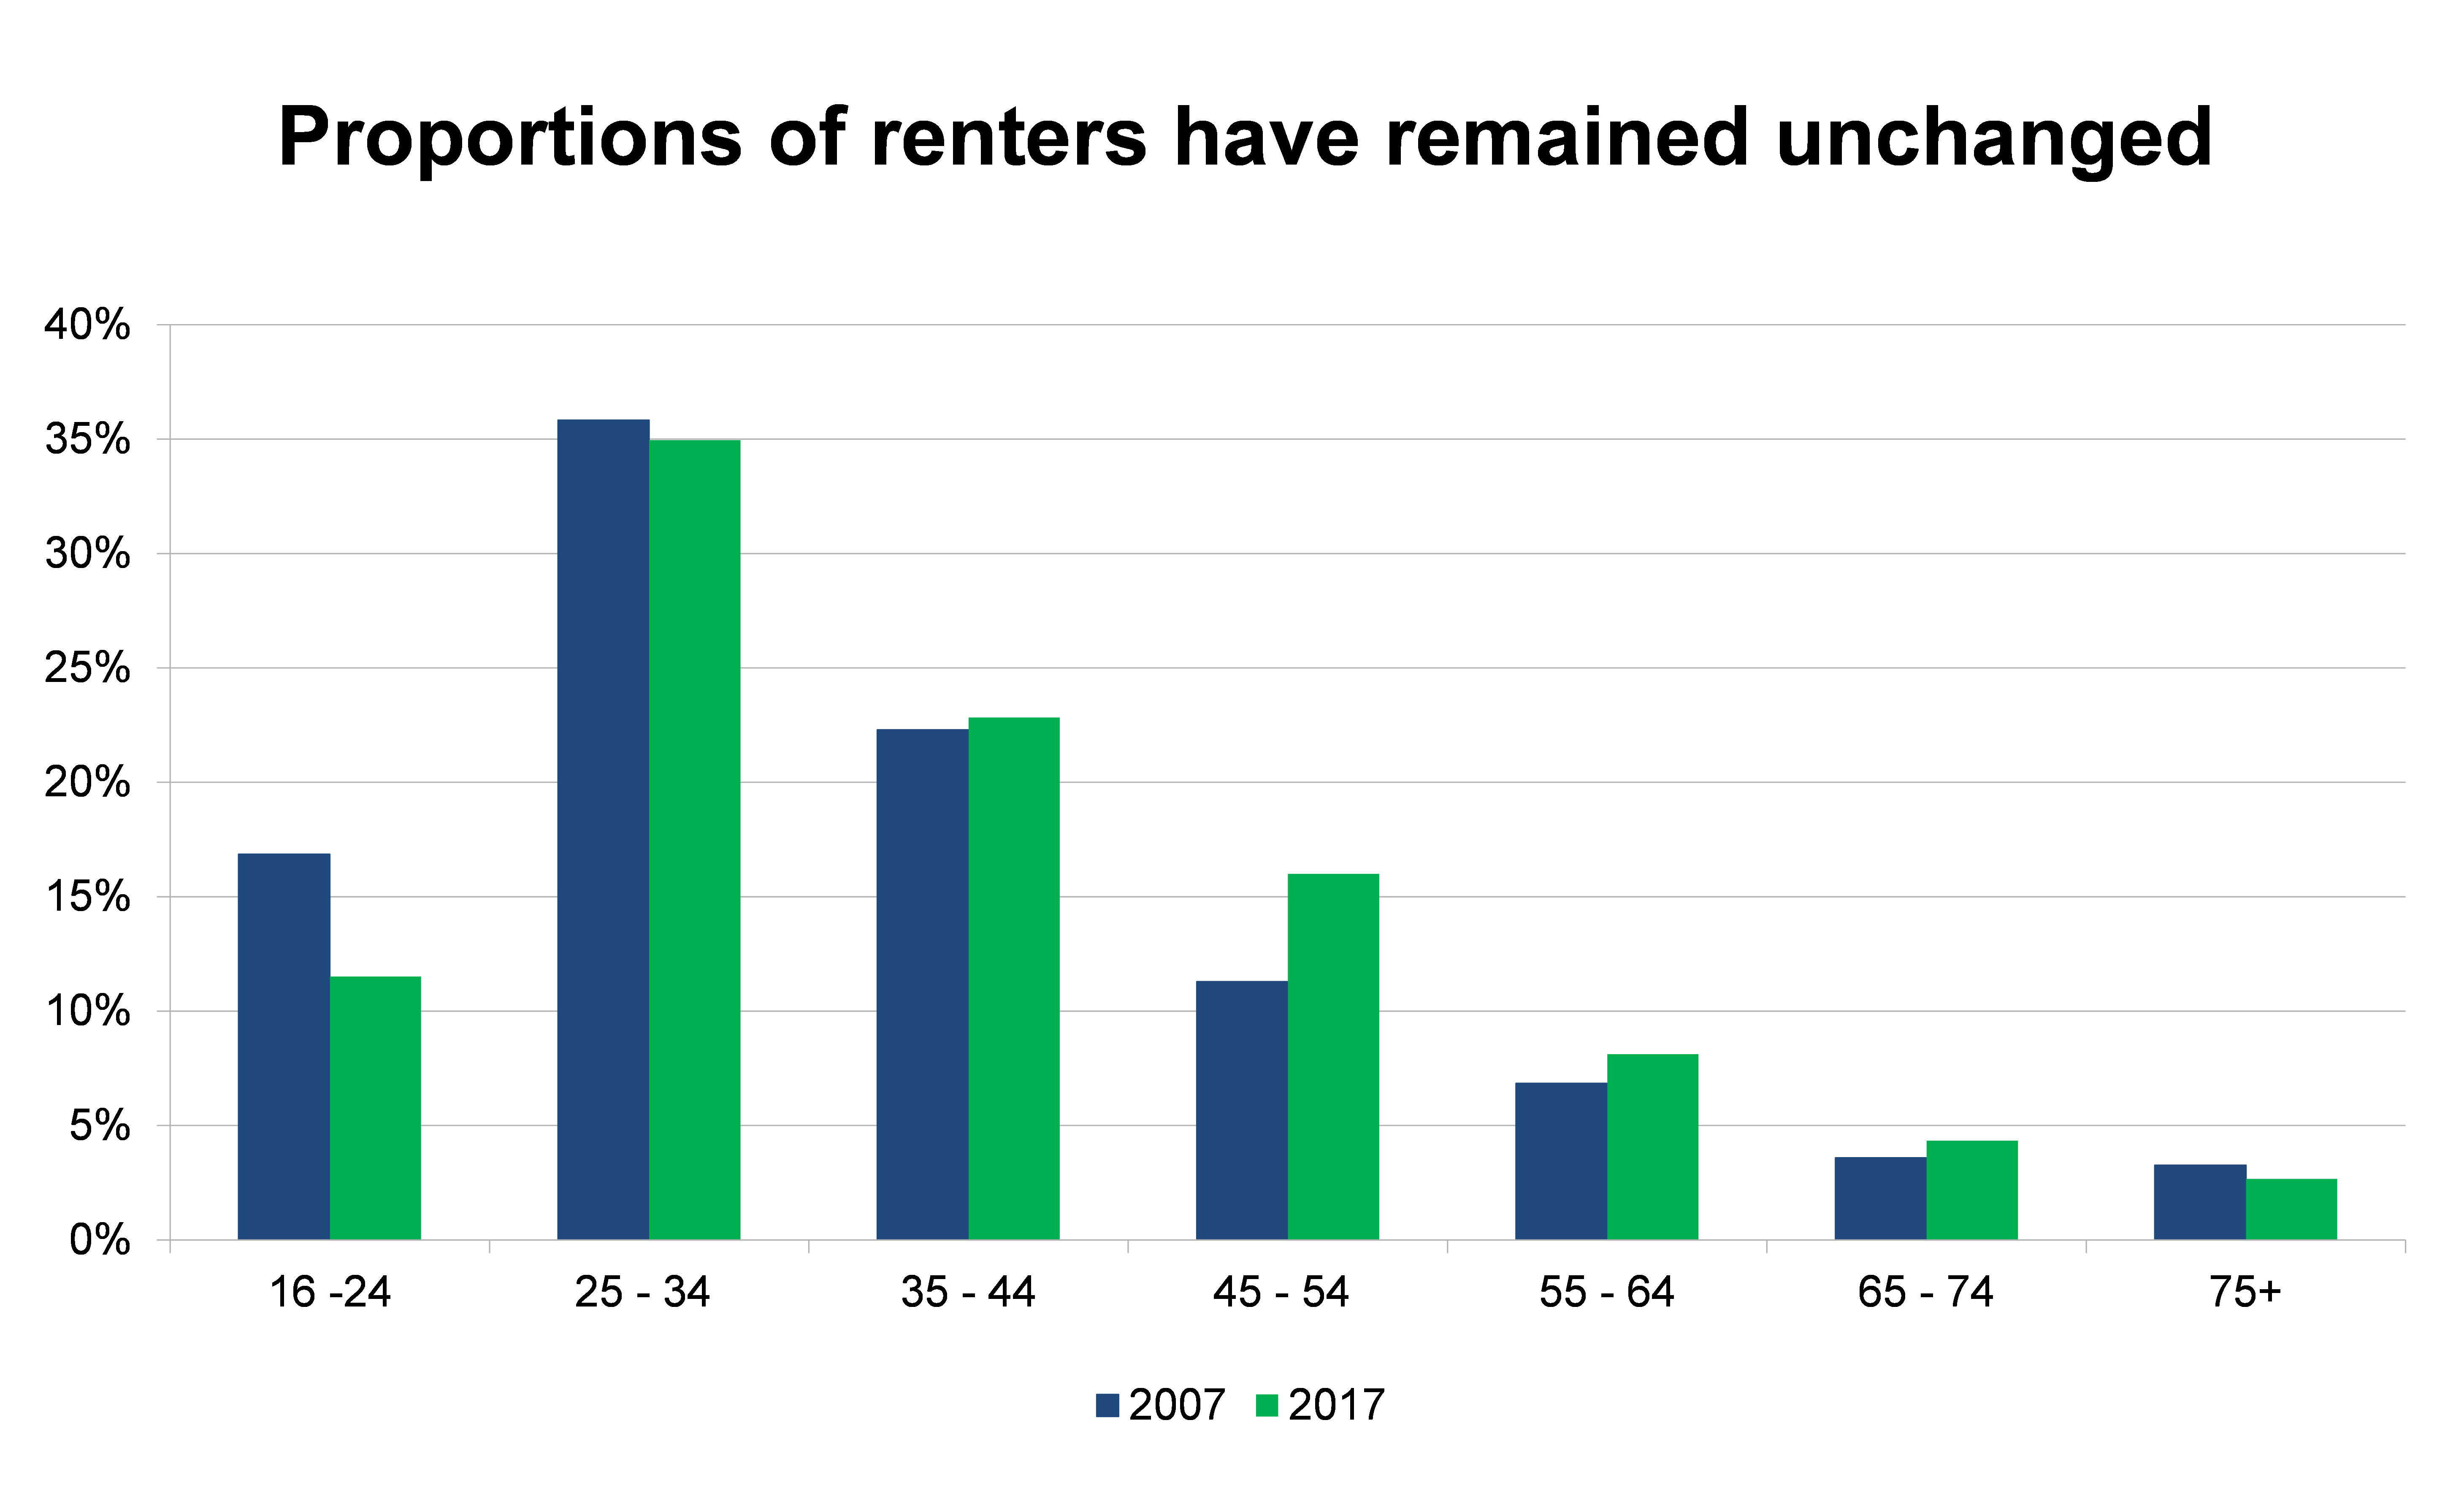 A bar chart comparing the proportions of renters in the UK by age, between 2007 and 2017